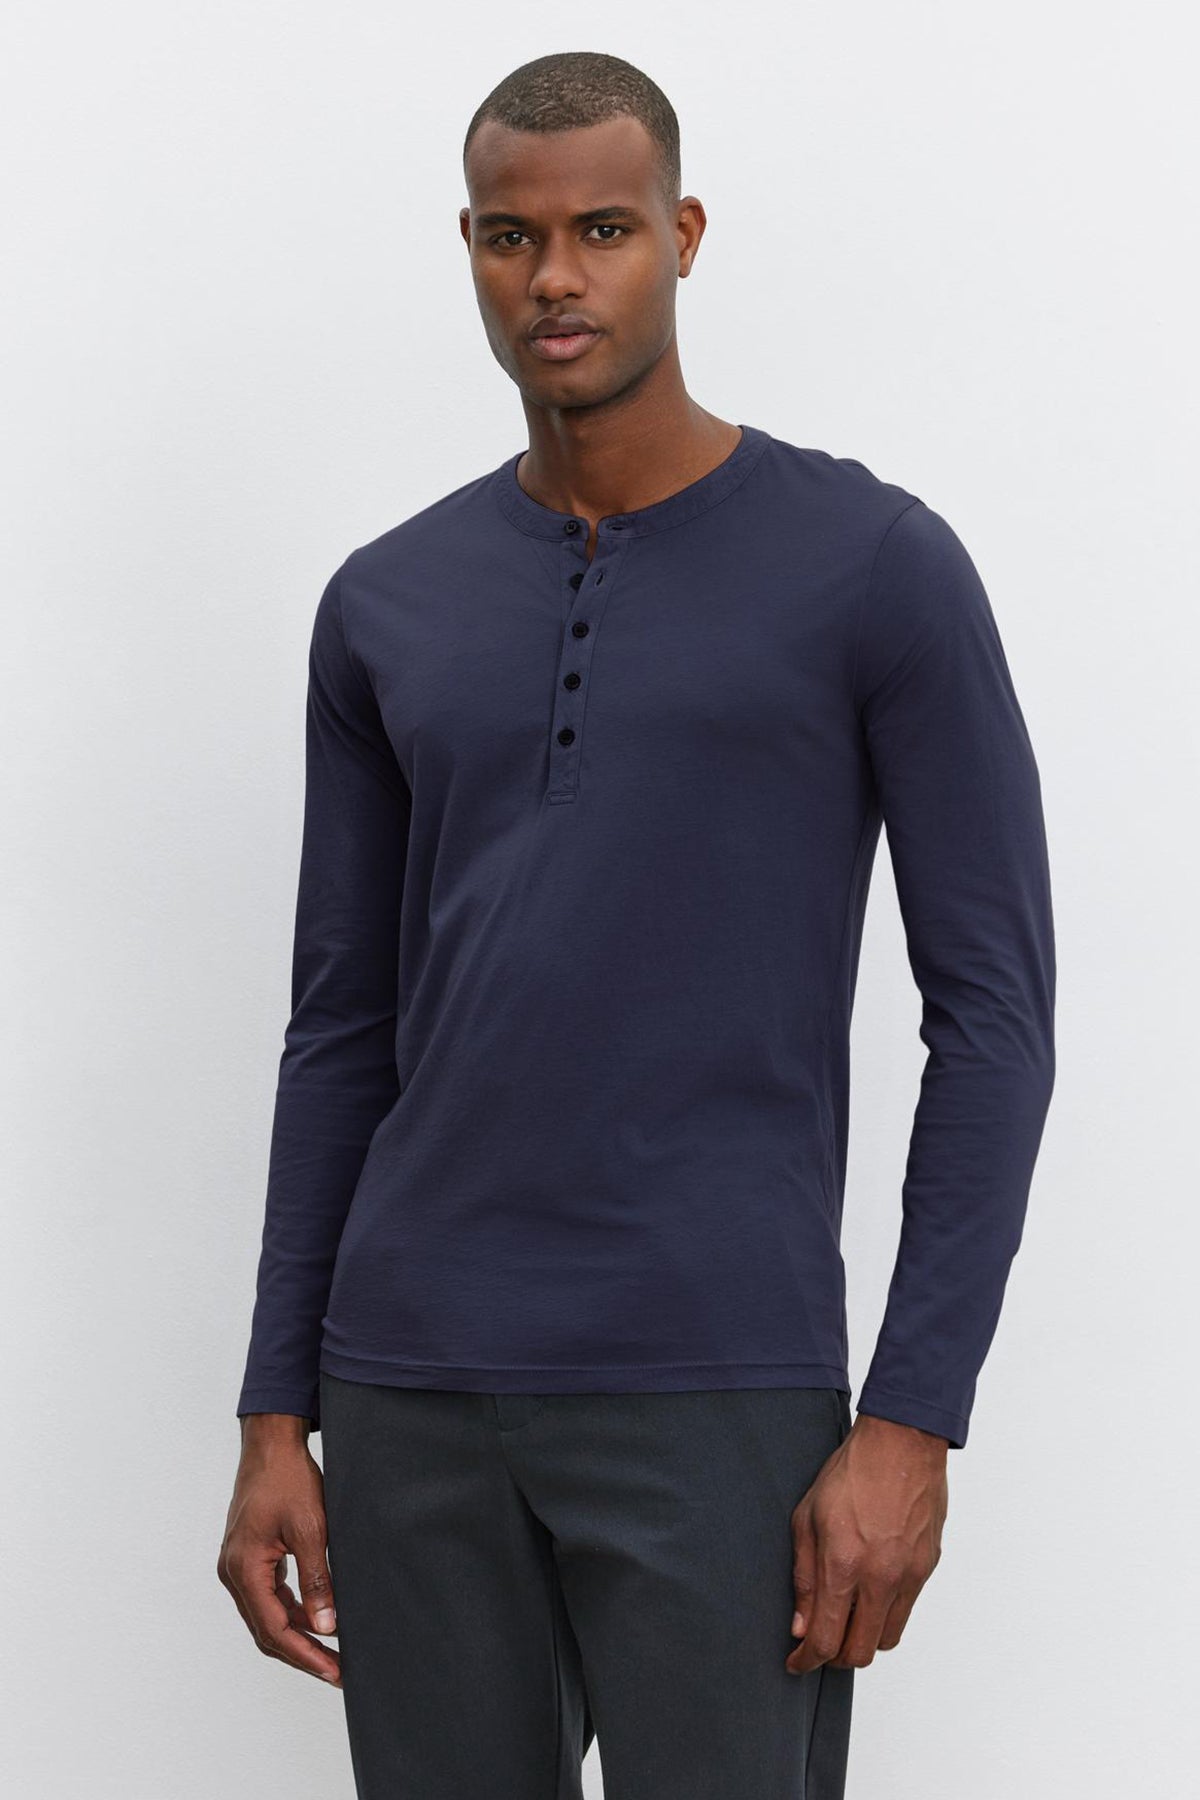 A man stands against a plain background, wearing a long-sleeve, dark blue ALVARO HENLEY by Velvet by Graham & Spencer and dark grey pants. The lightweight whisper knit fabric ensures comfort and style.-36273890525377